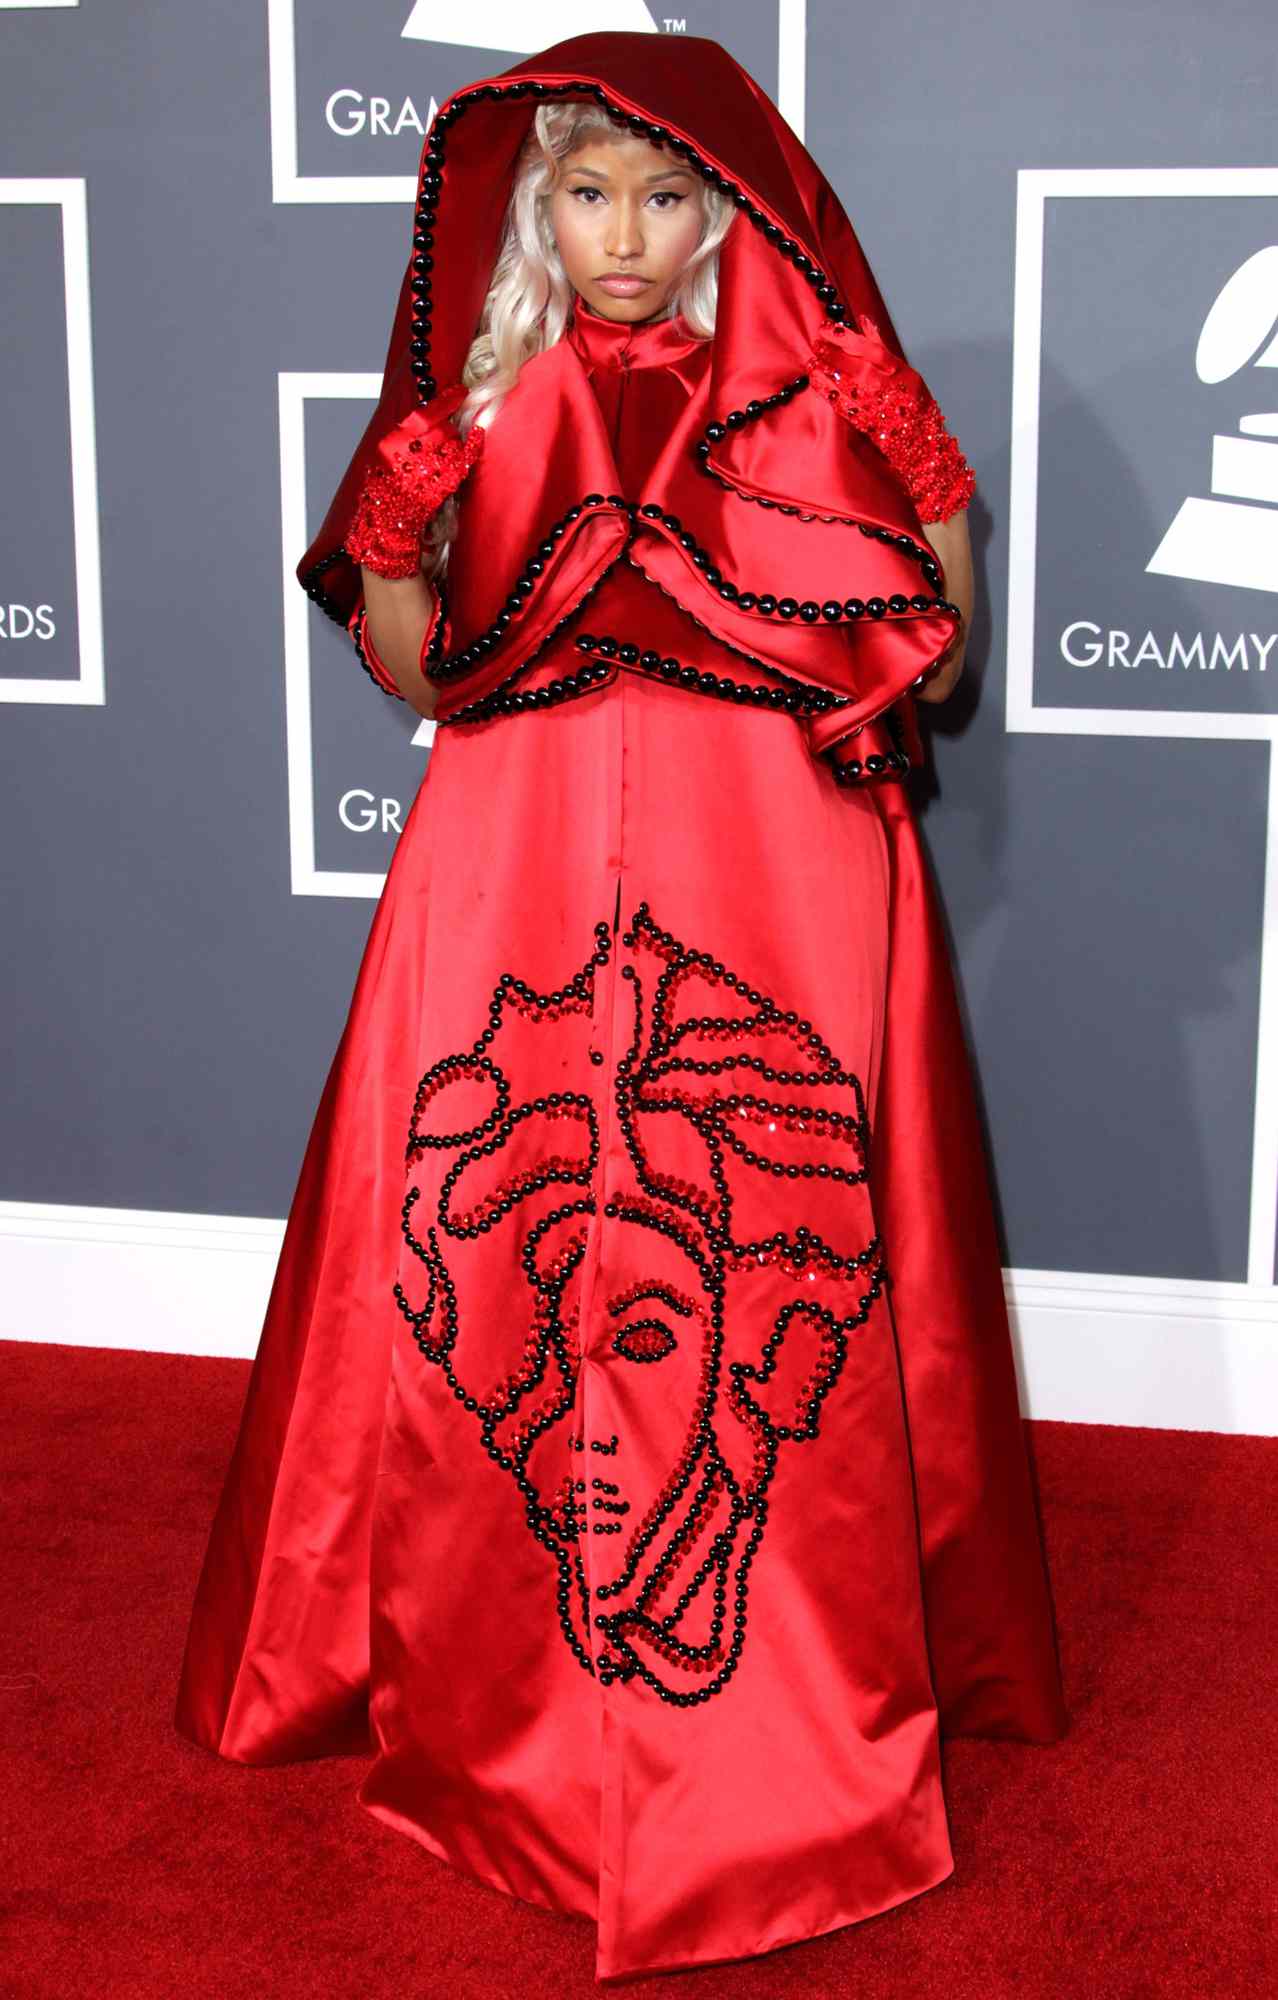 Nicki Minaj arrives at The 54th Annual GRAMMY Awards at Staples Center on February 12, 2012 in Los Angeles, California